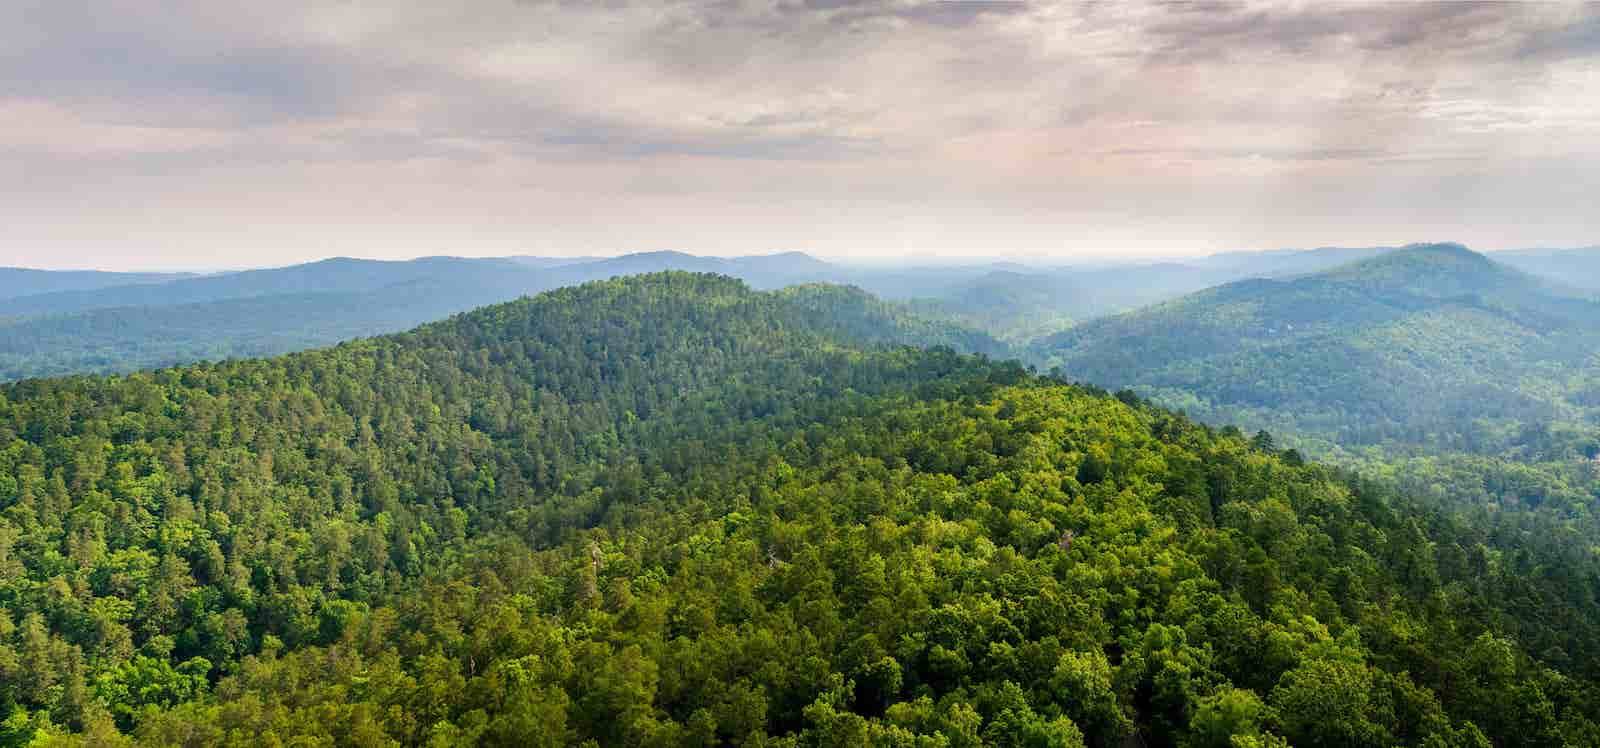 A photo of a forest setting in Arkansas.